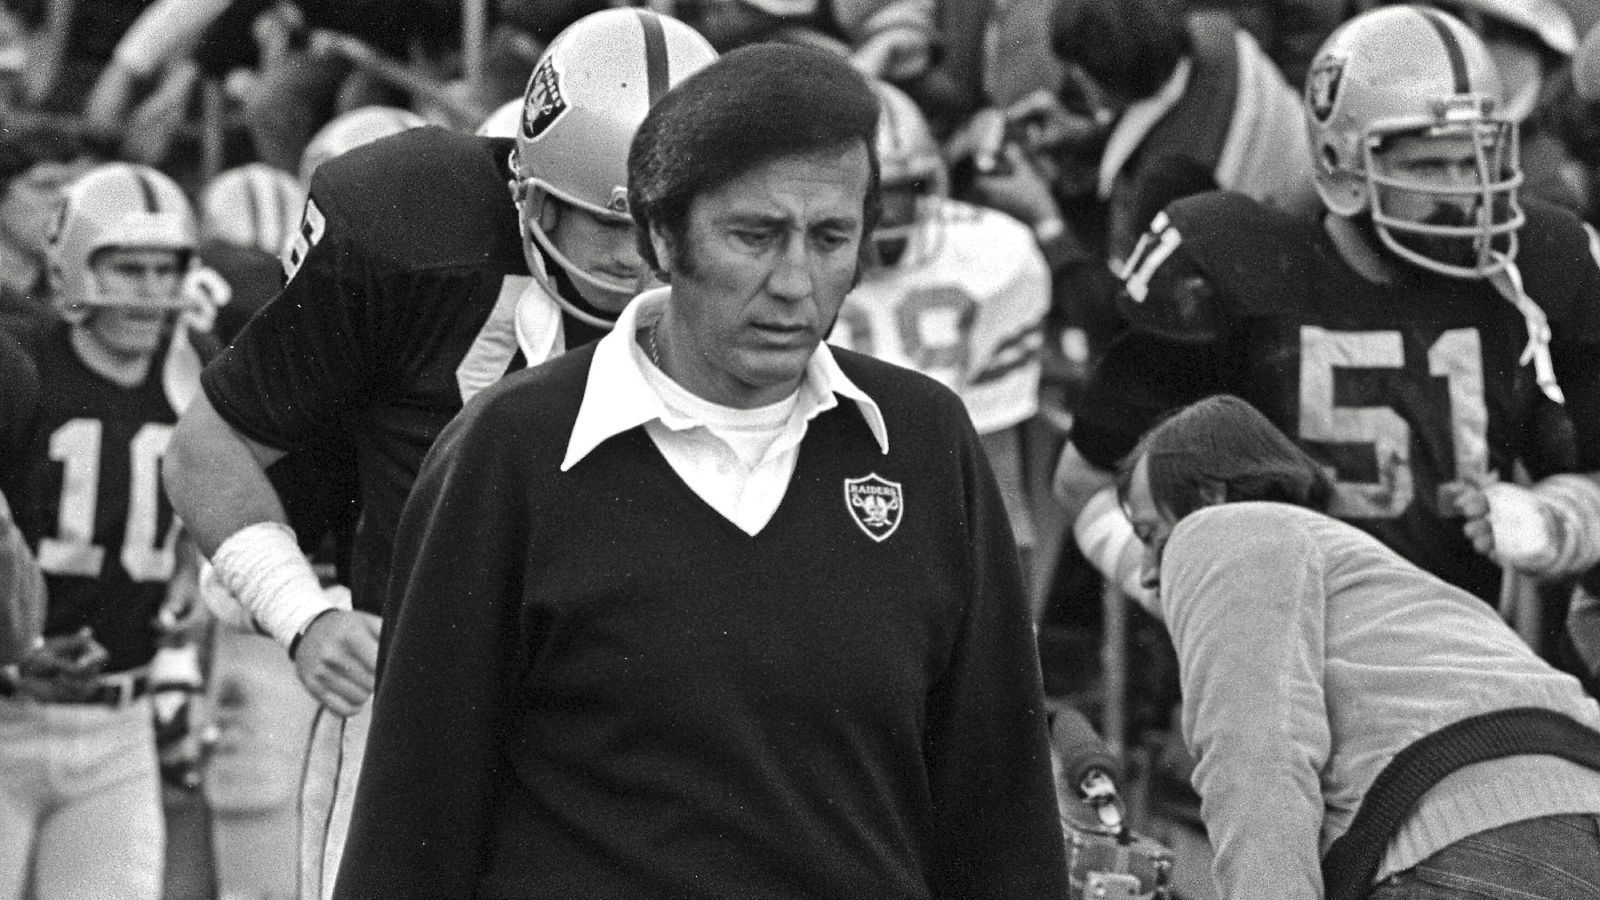 
                <strong>2021: Tom Flores</strong><br>
                &#x2022; Position: Head Coach -<br>&#x2022; In der NFL: 1979 bis 1994 -<br>&#x2022; Teams: Oakland/Los Angeles Raiders, Seattle Seahawks <br>
              